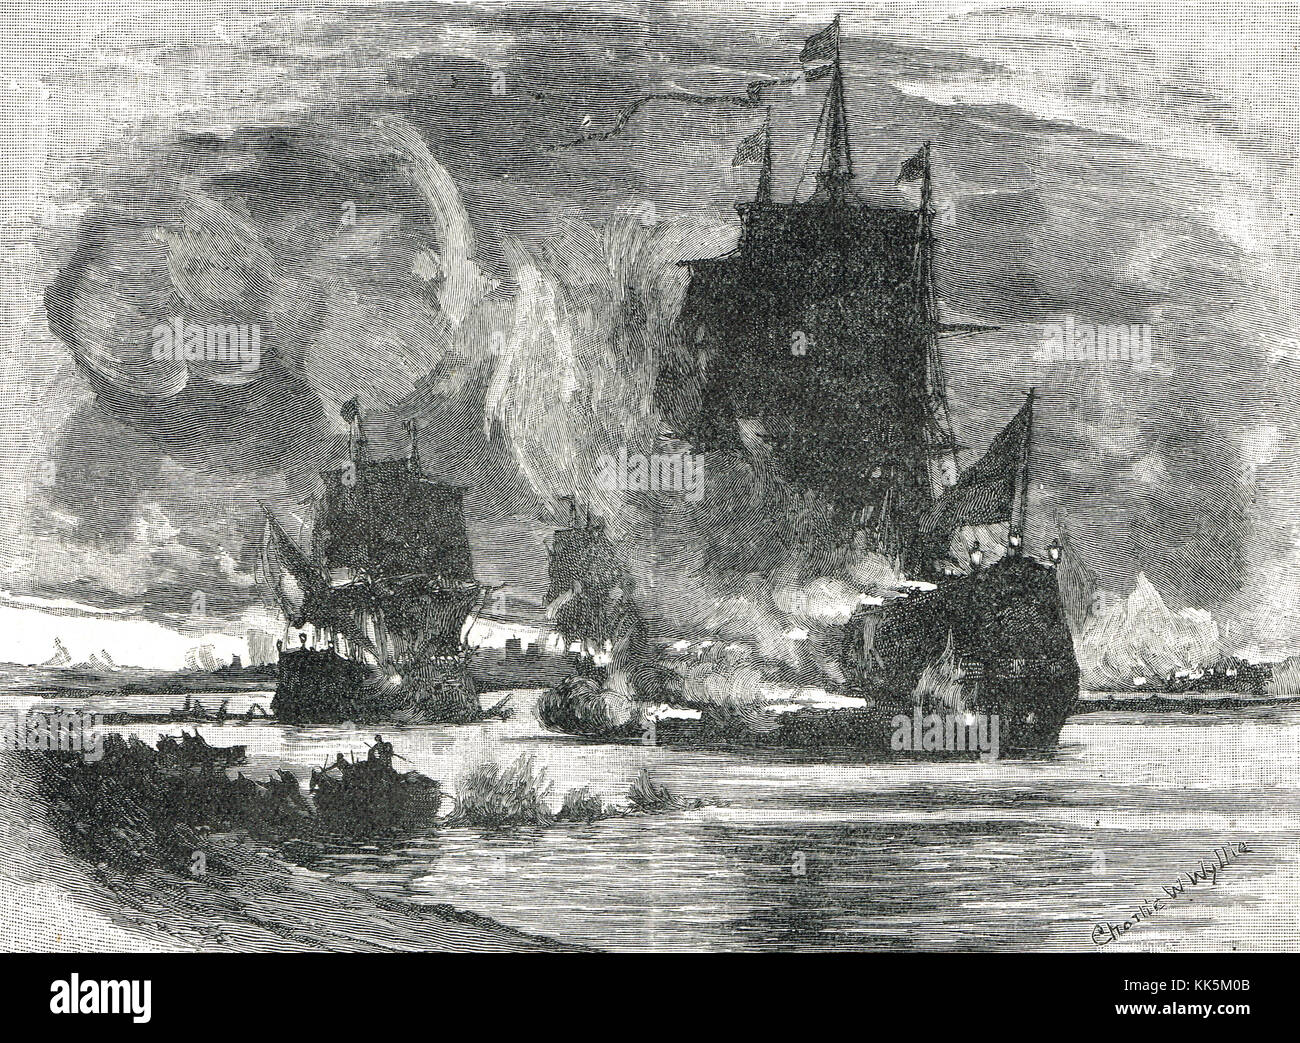 The merchant ships Mountjoy and The Phoenix breaking the boom at Londonderry, 28 July,1689.  Ending the Siege of Derry. Stock Photo